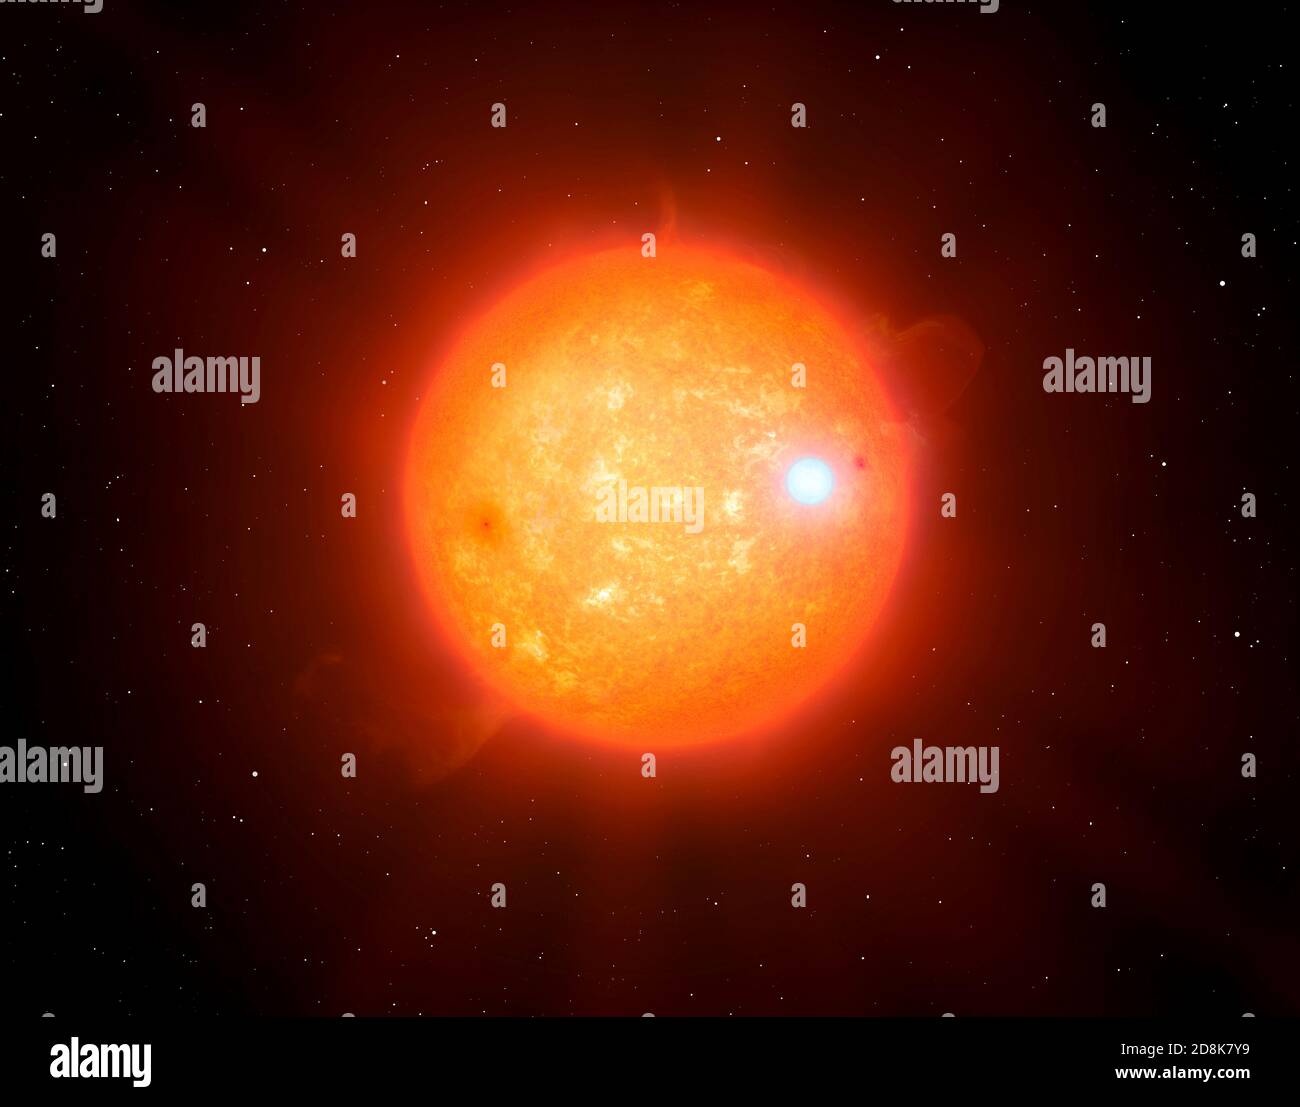 This illustration, commissioned for a press release by Sheffield University in the UK, shows the binary star system SDSS J2355+0448. It comprises a white dwarf orbiting an ultra-cool red dwarf star. Stock Photo